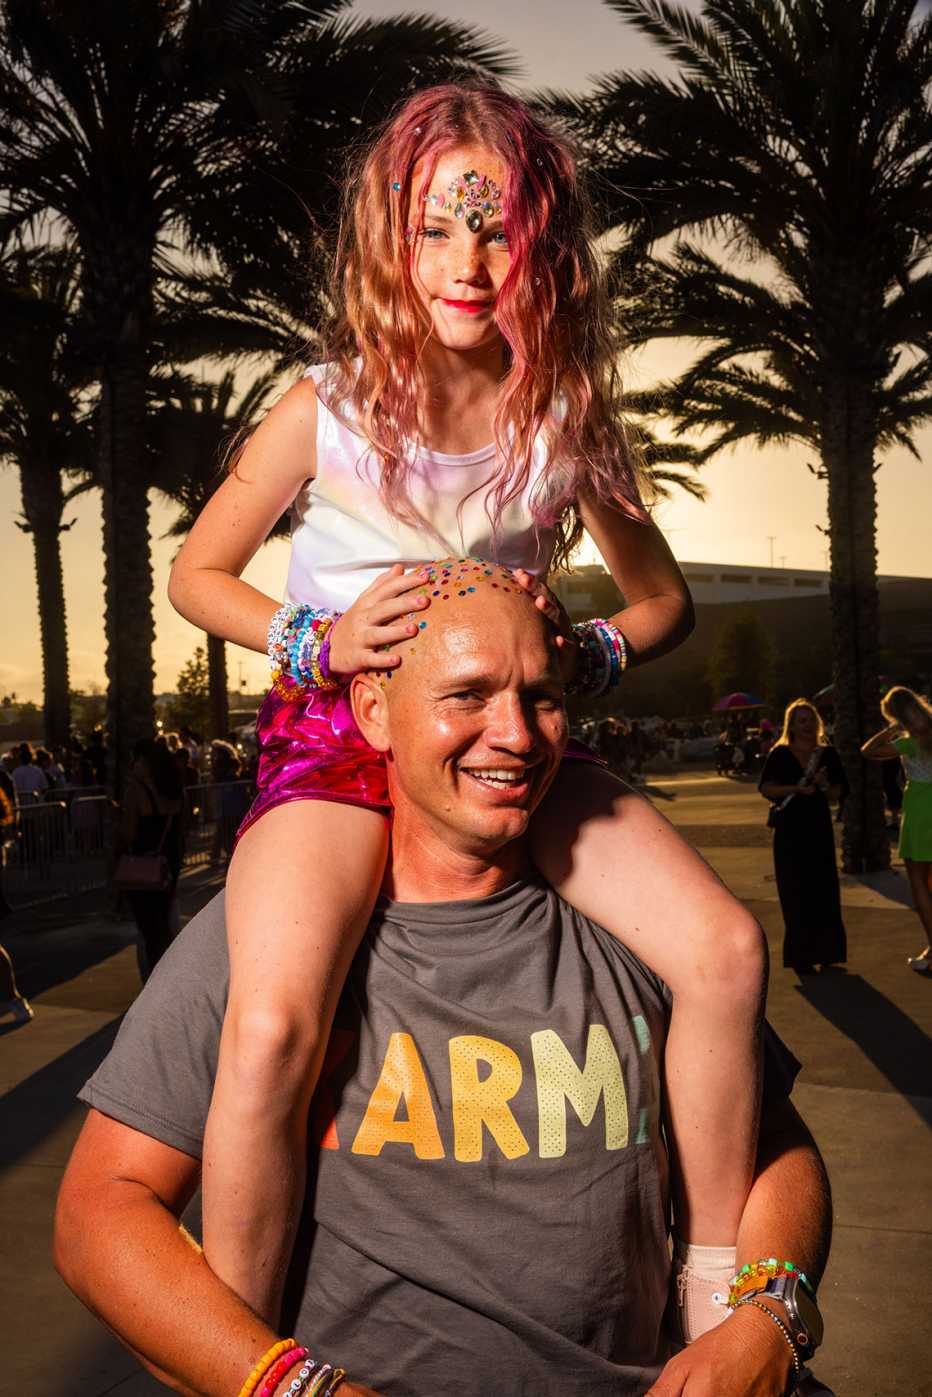 matt pobst with a shaved and bedazzled head posing with his daughter taylor on his shoulders